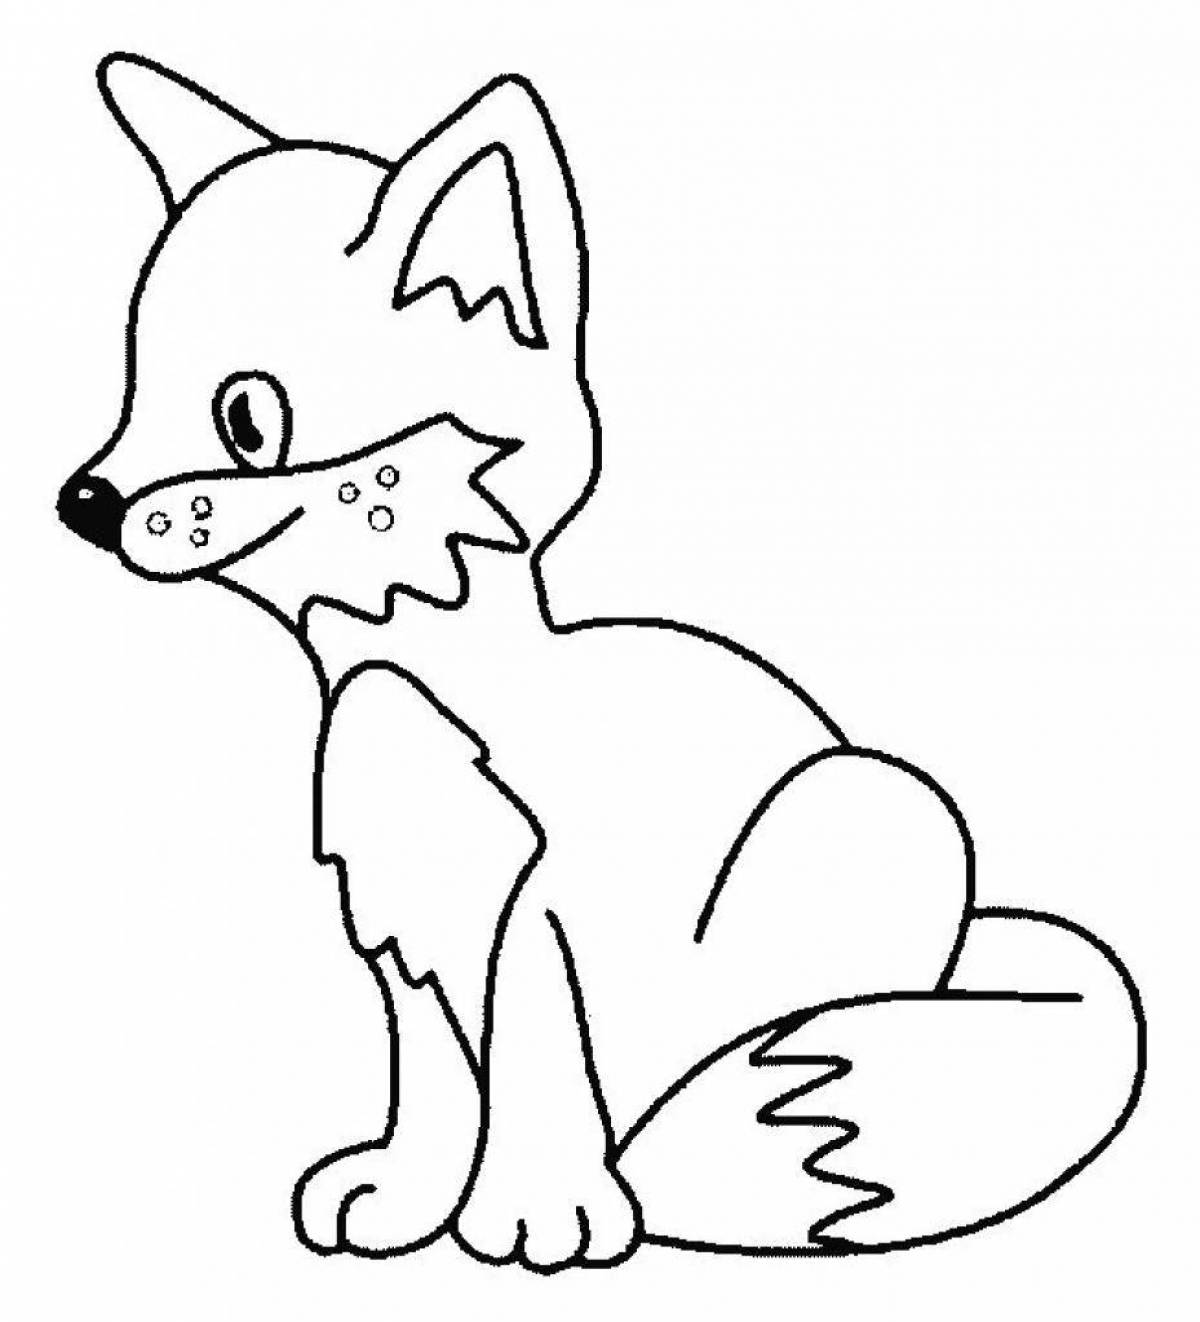 Colourful fox coloring book for children 4-5 years old